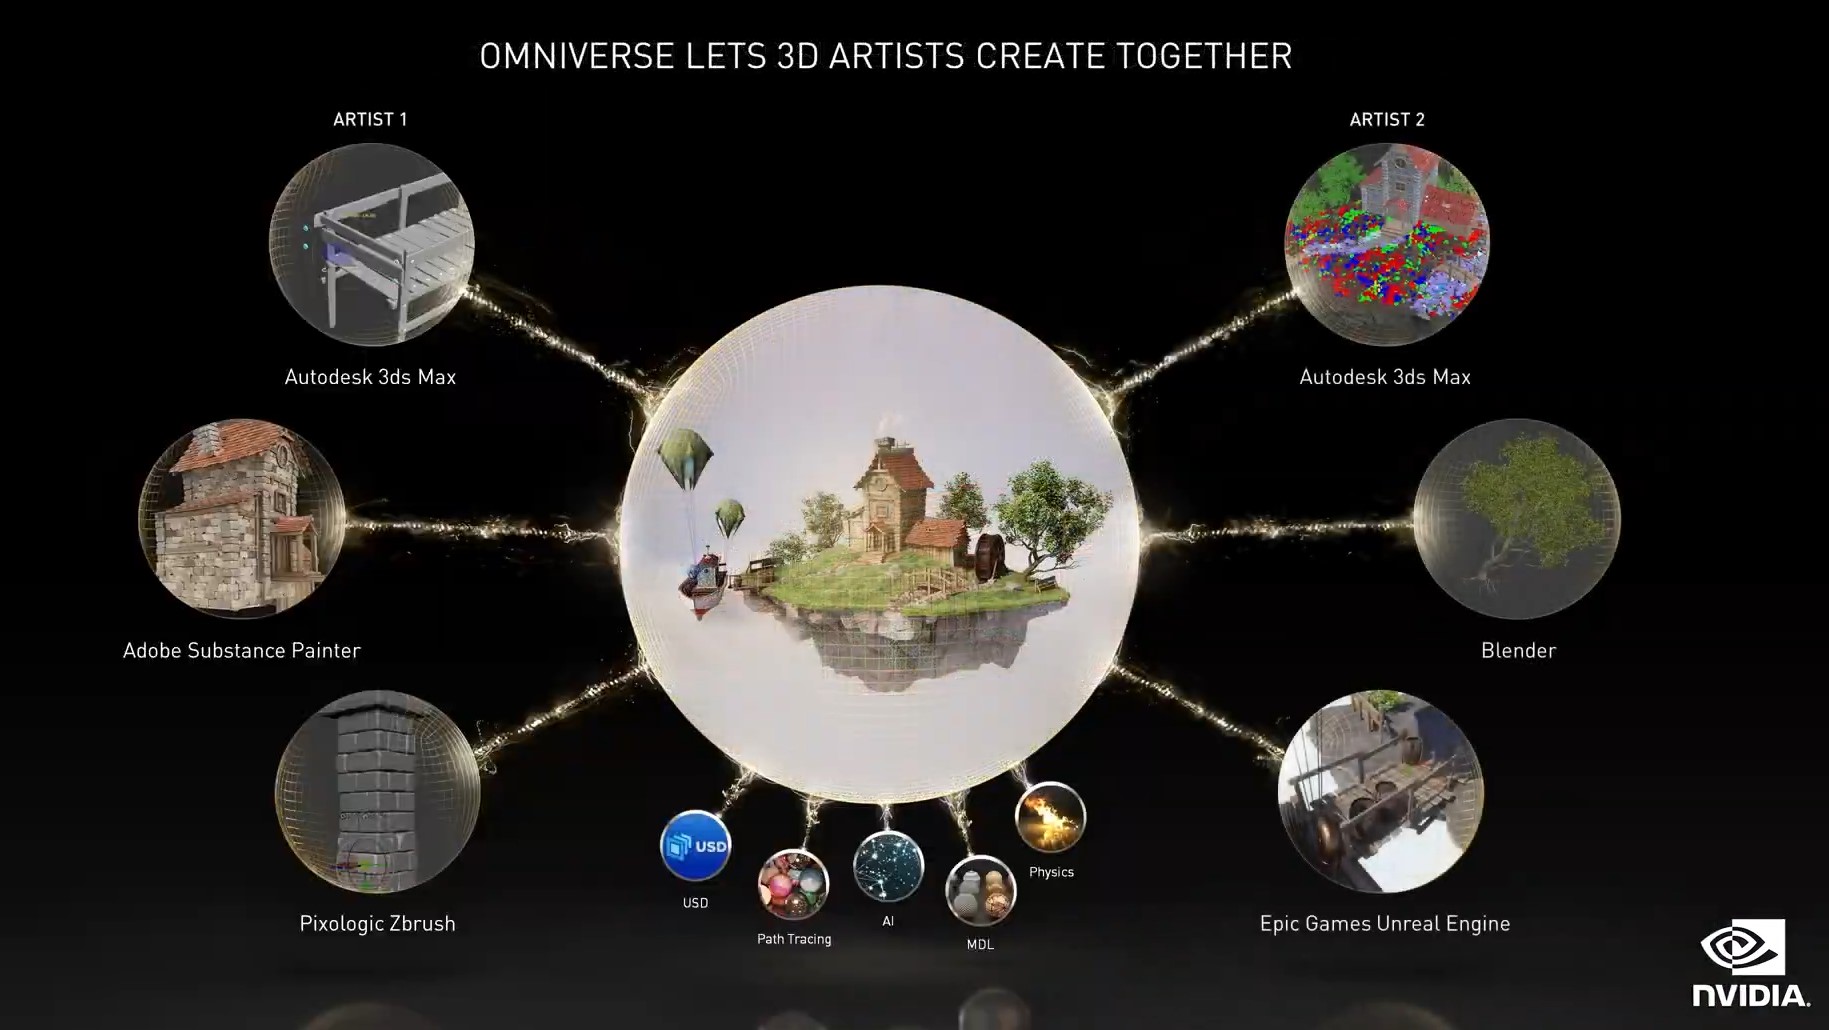 Nvidia expands its Omniverse